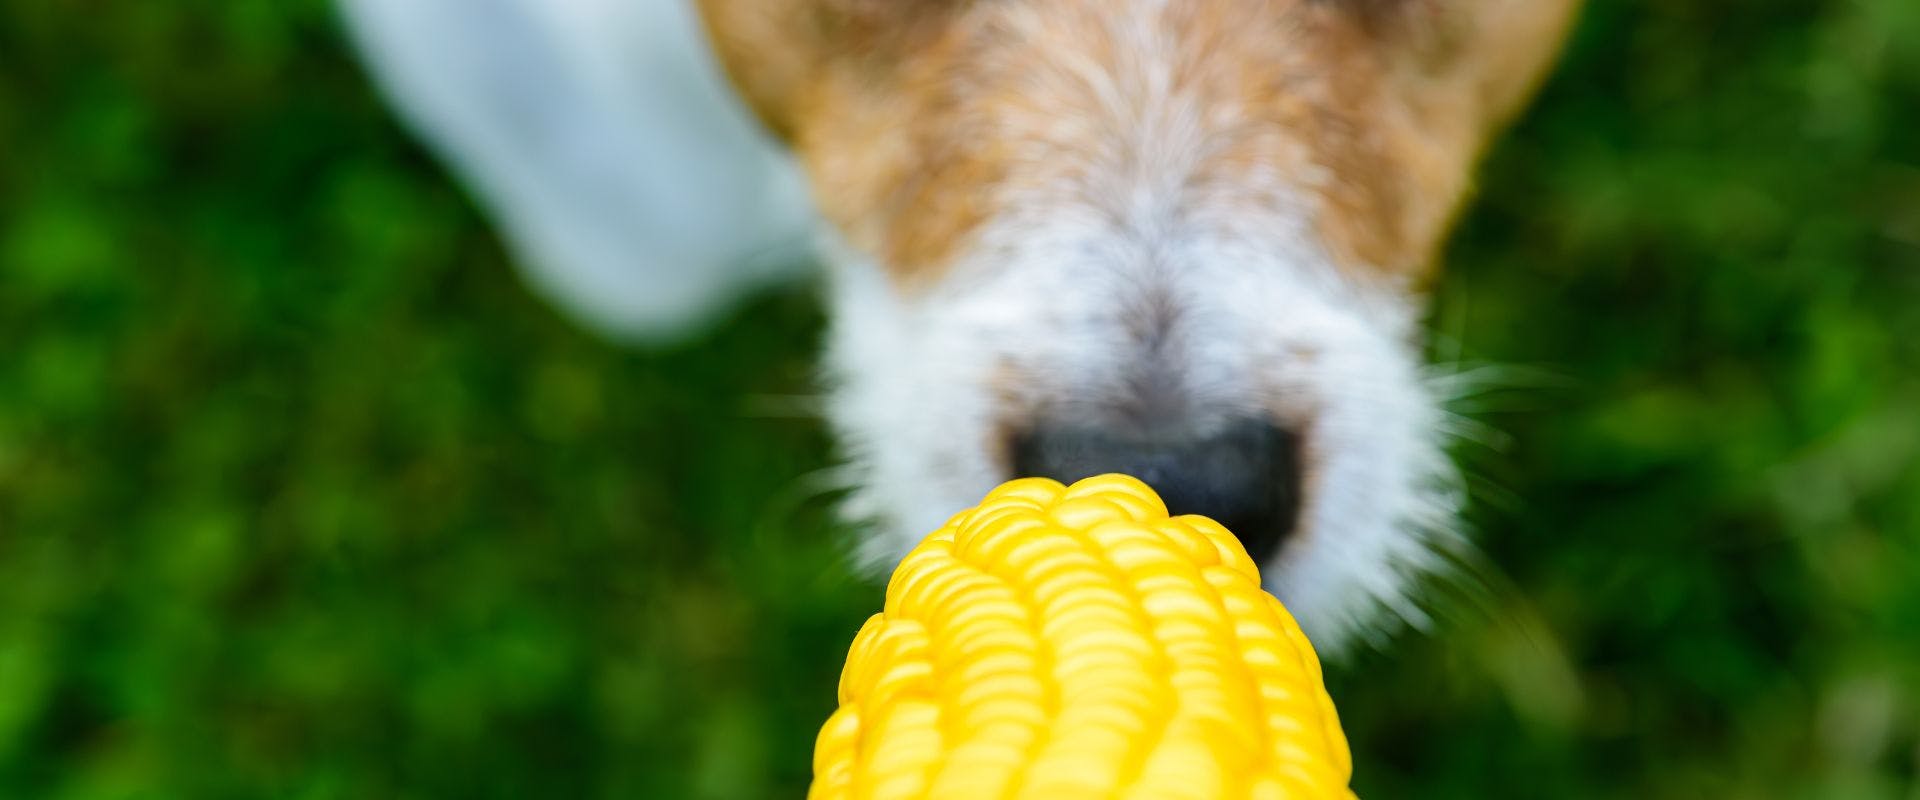 Dog's nose sniffing a corn on the cob